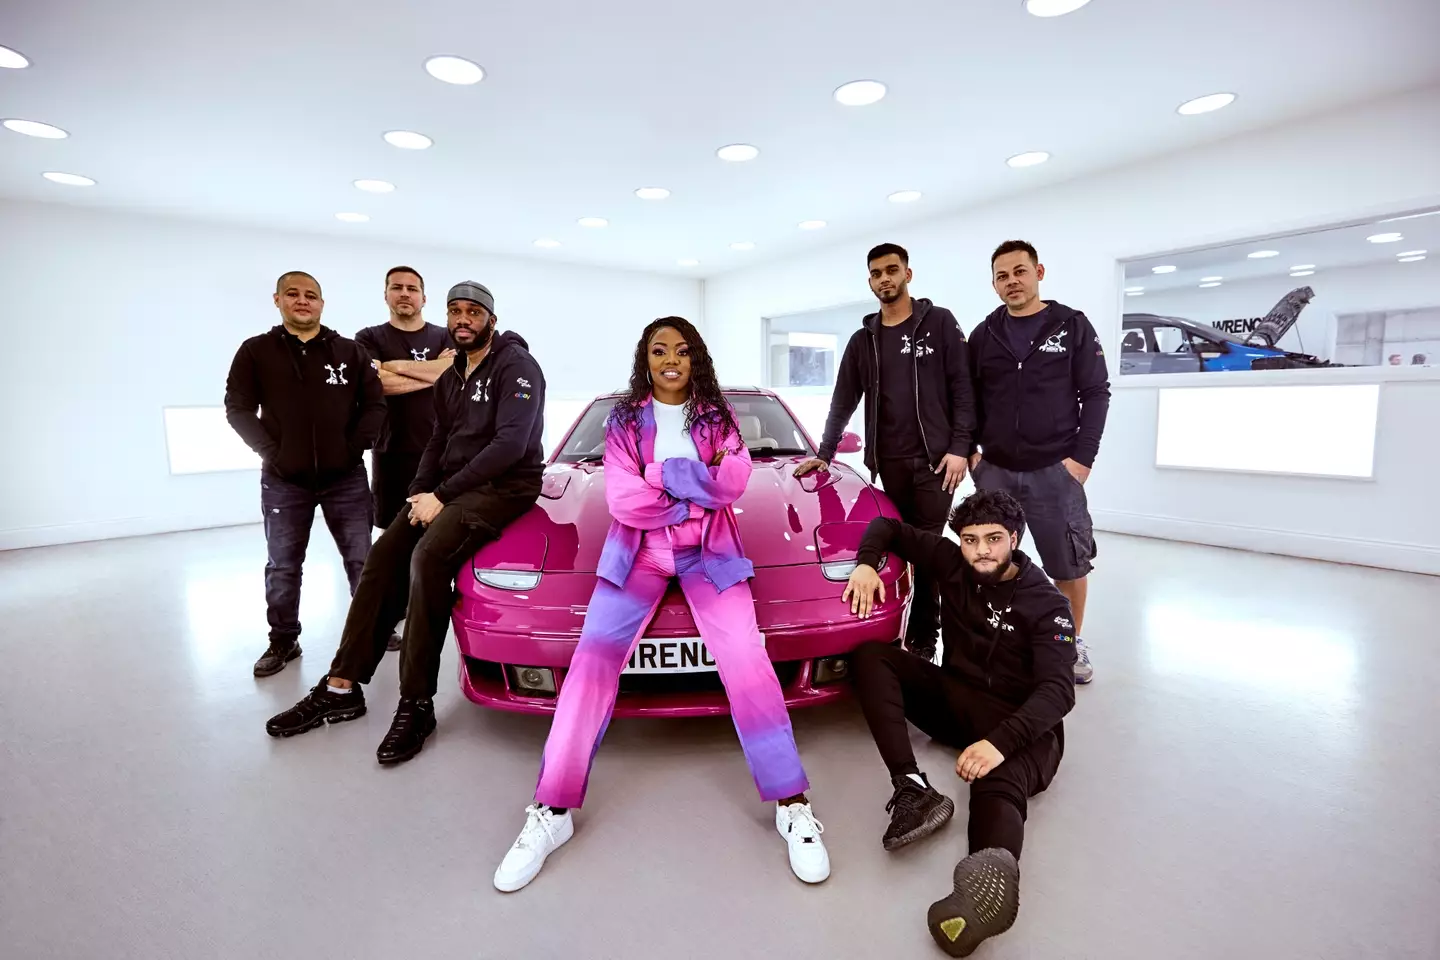 Lady Leshurr will take over hosting duties from Xzibit.